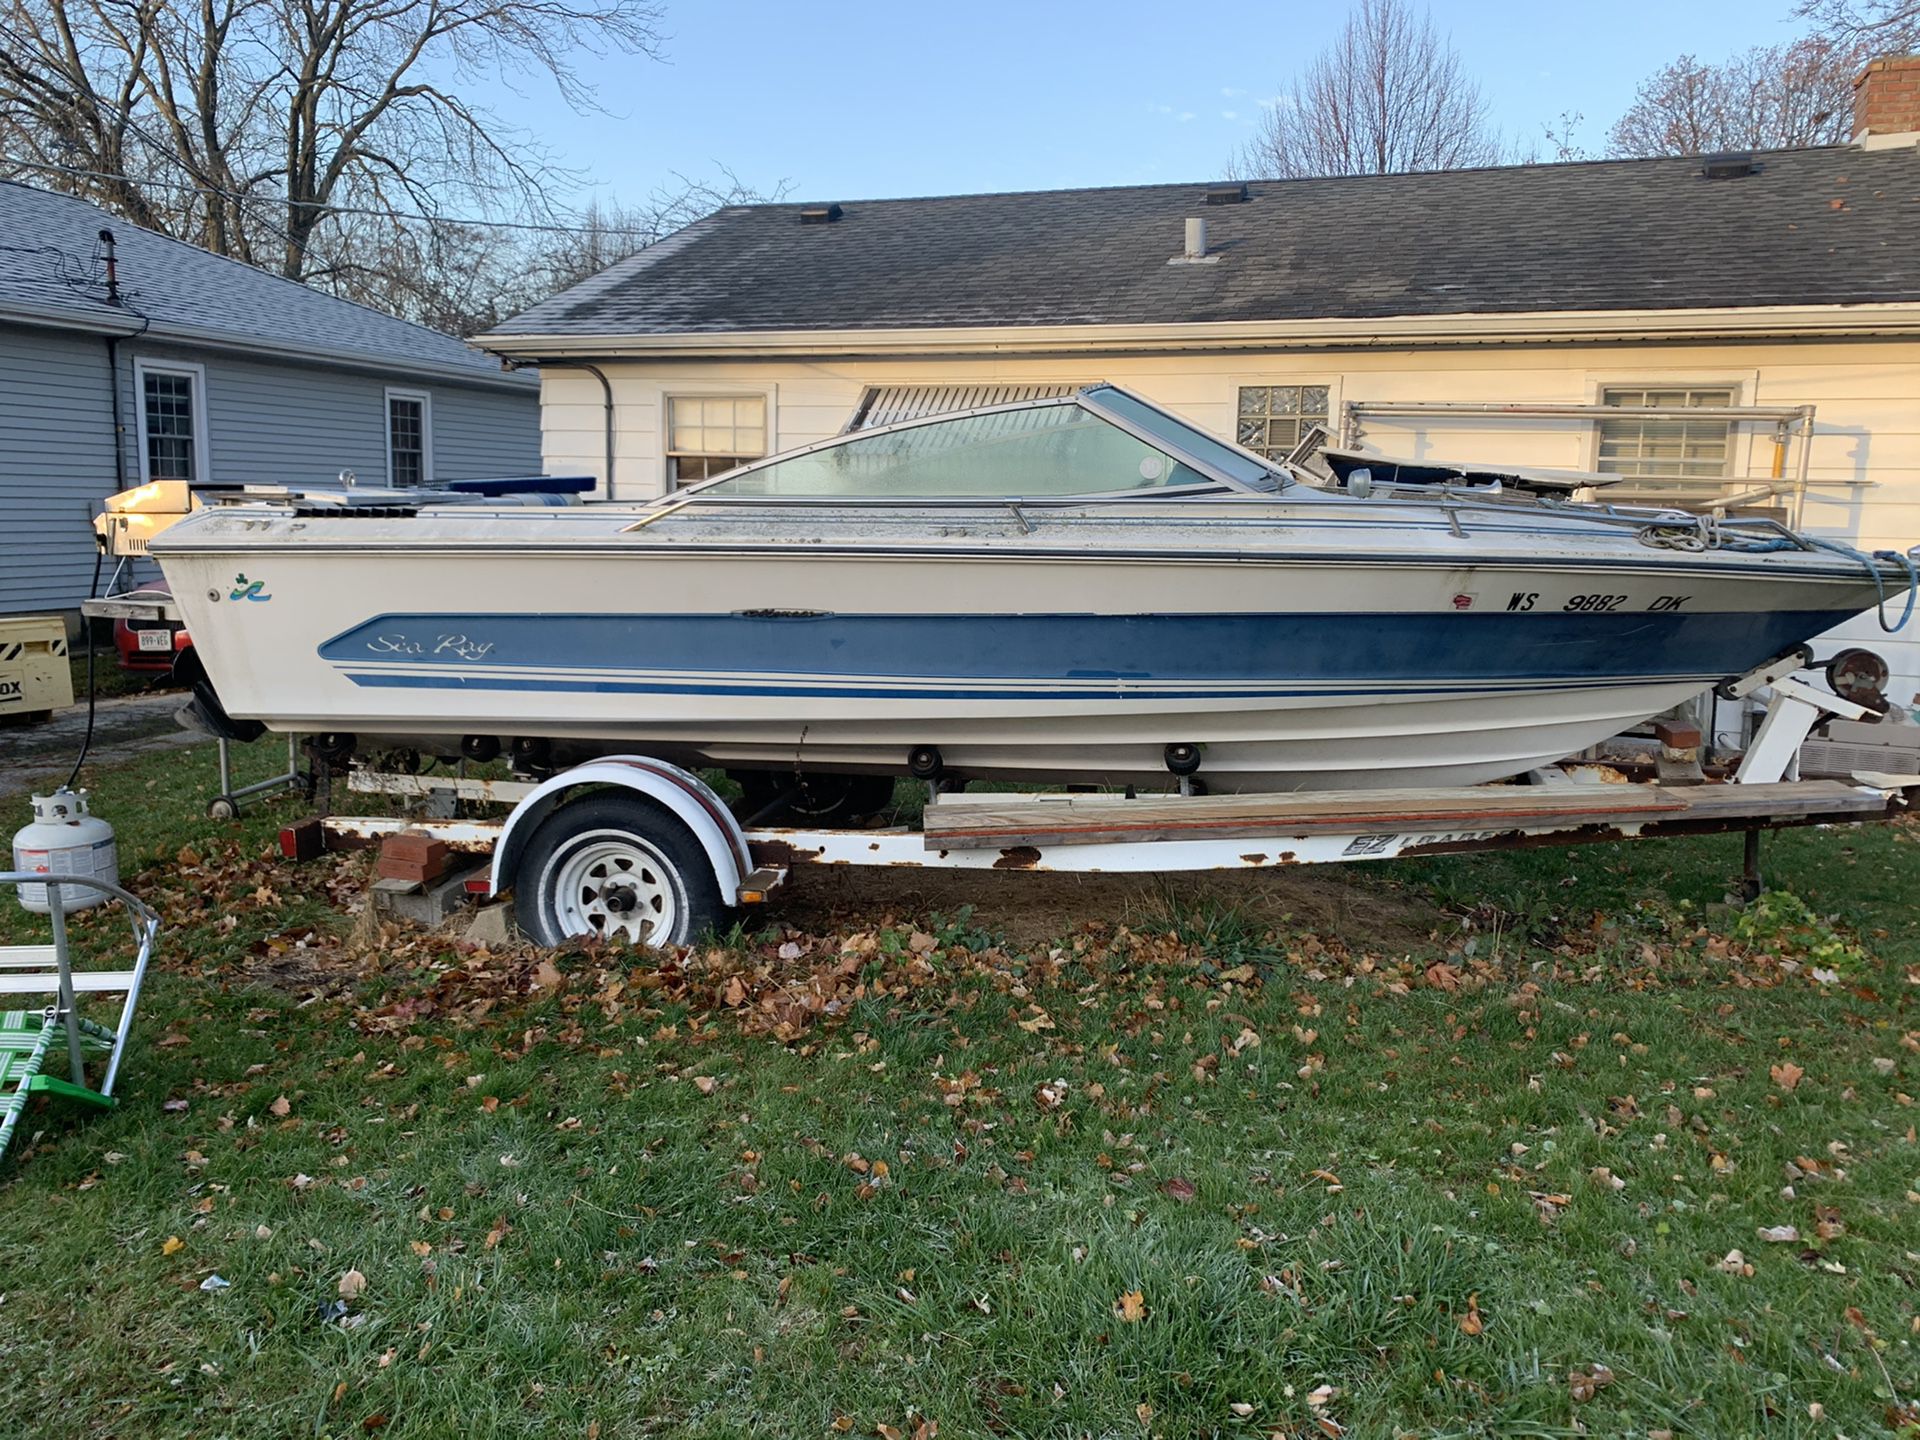 Sea ray boat for parts